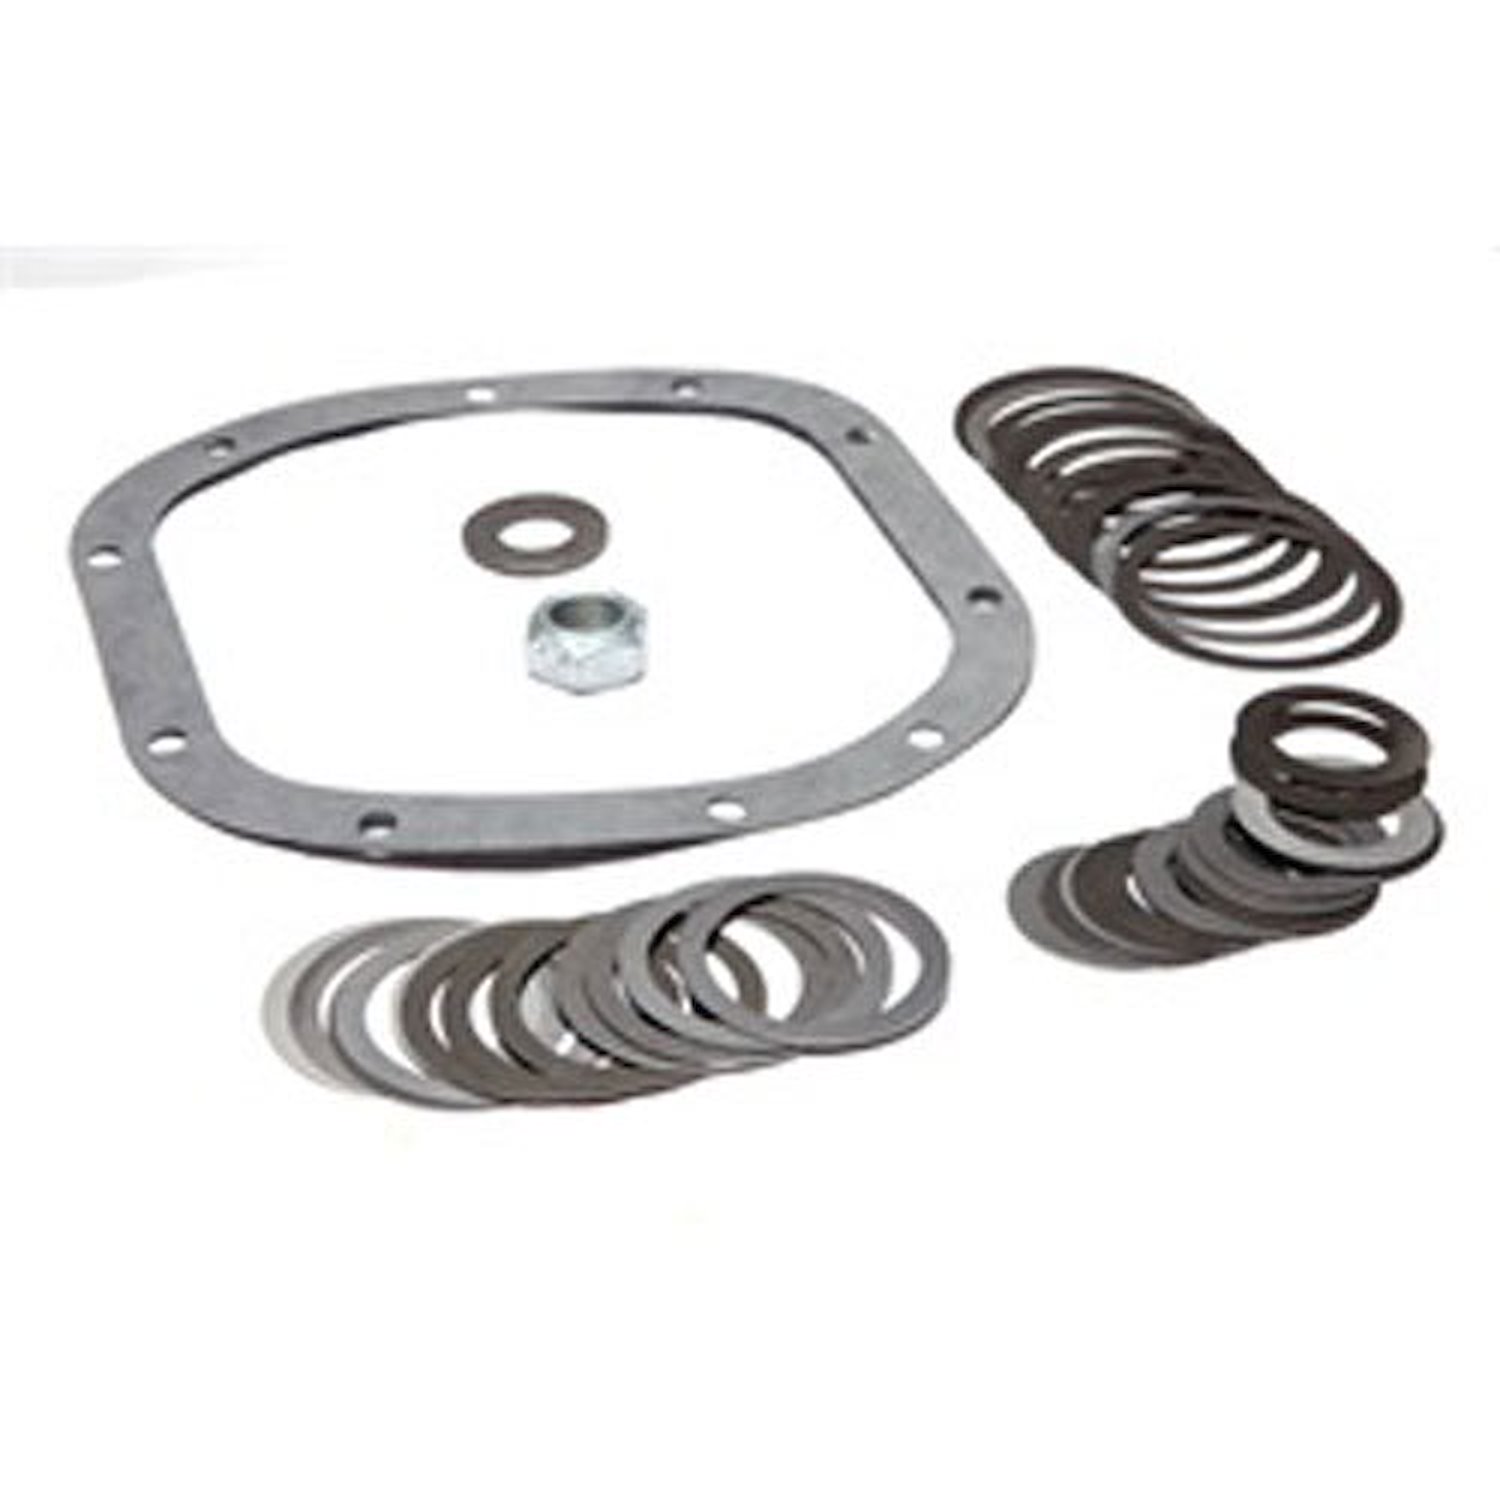 This pinion bearing shim kit from Omix-ADA is